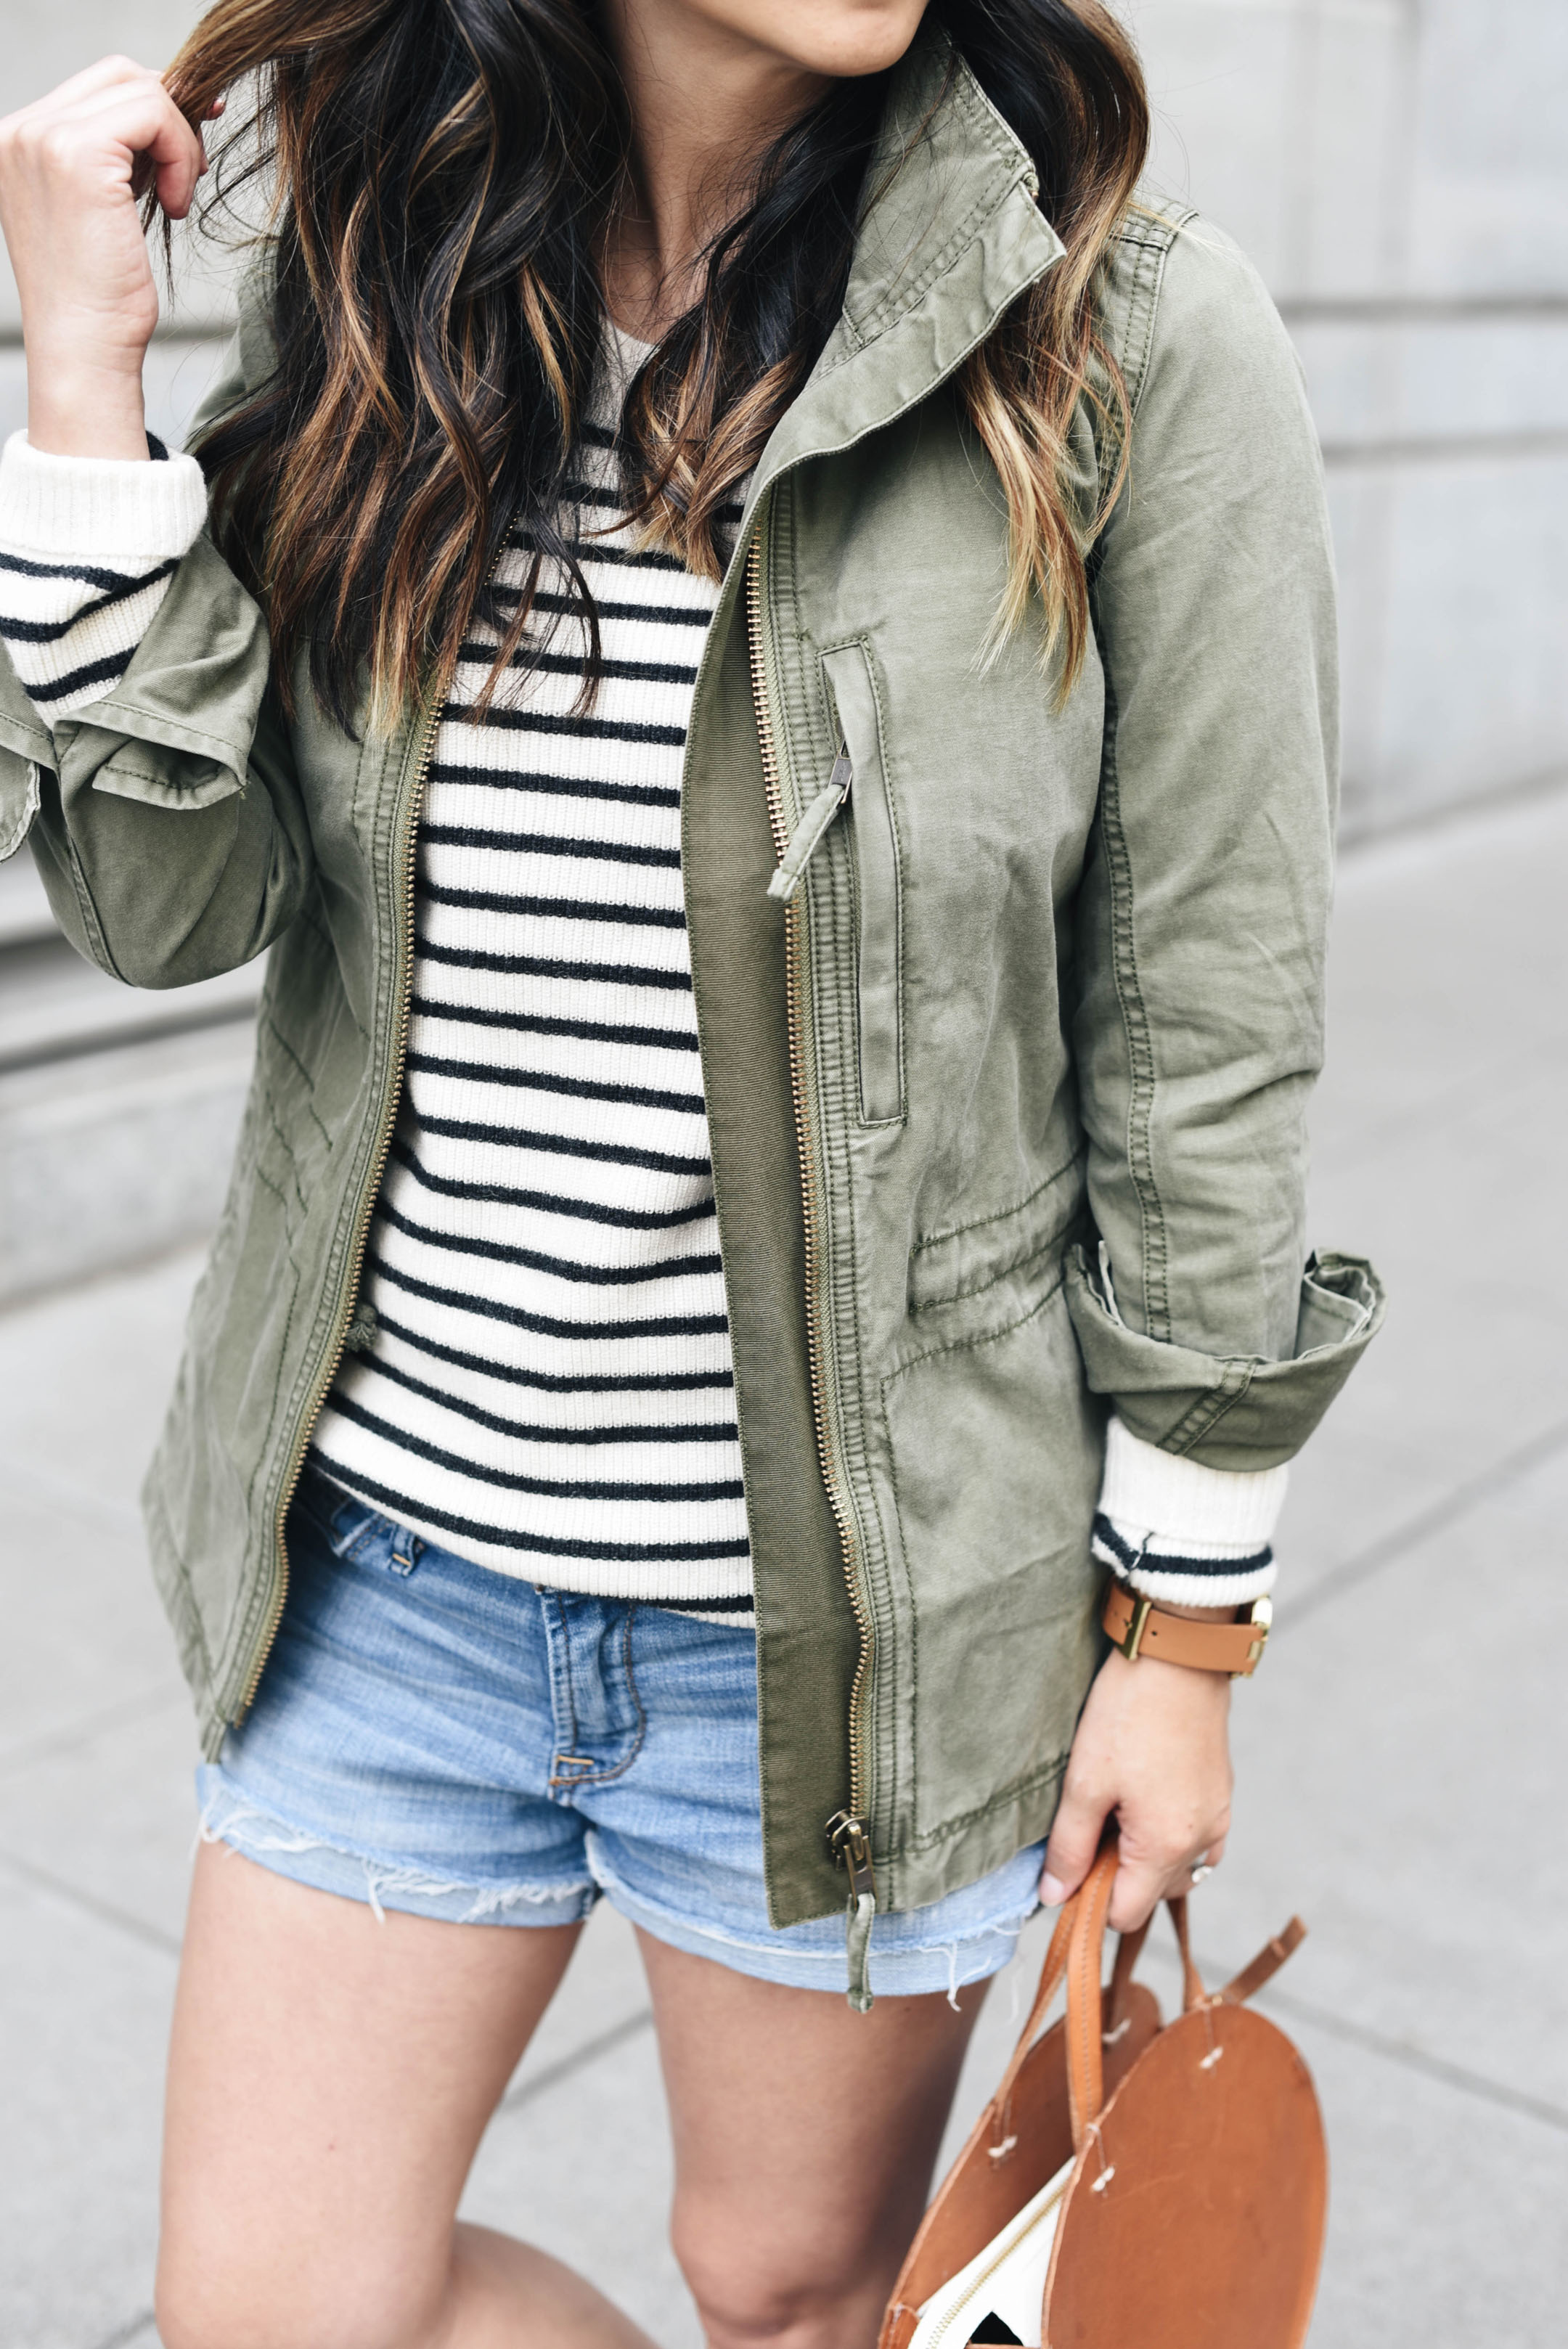 Easy summer to fall transitional looks